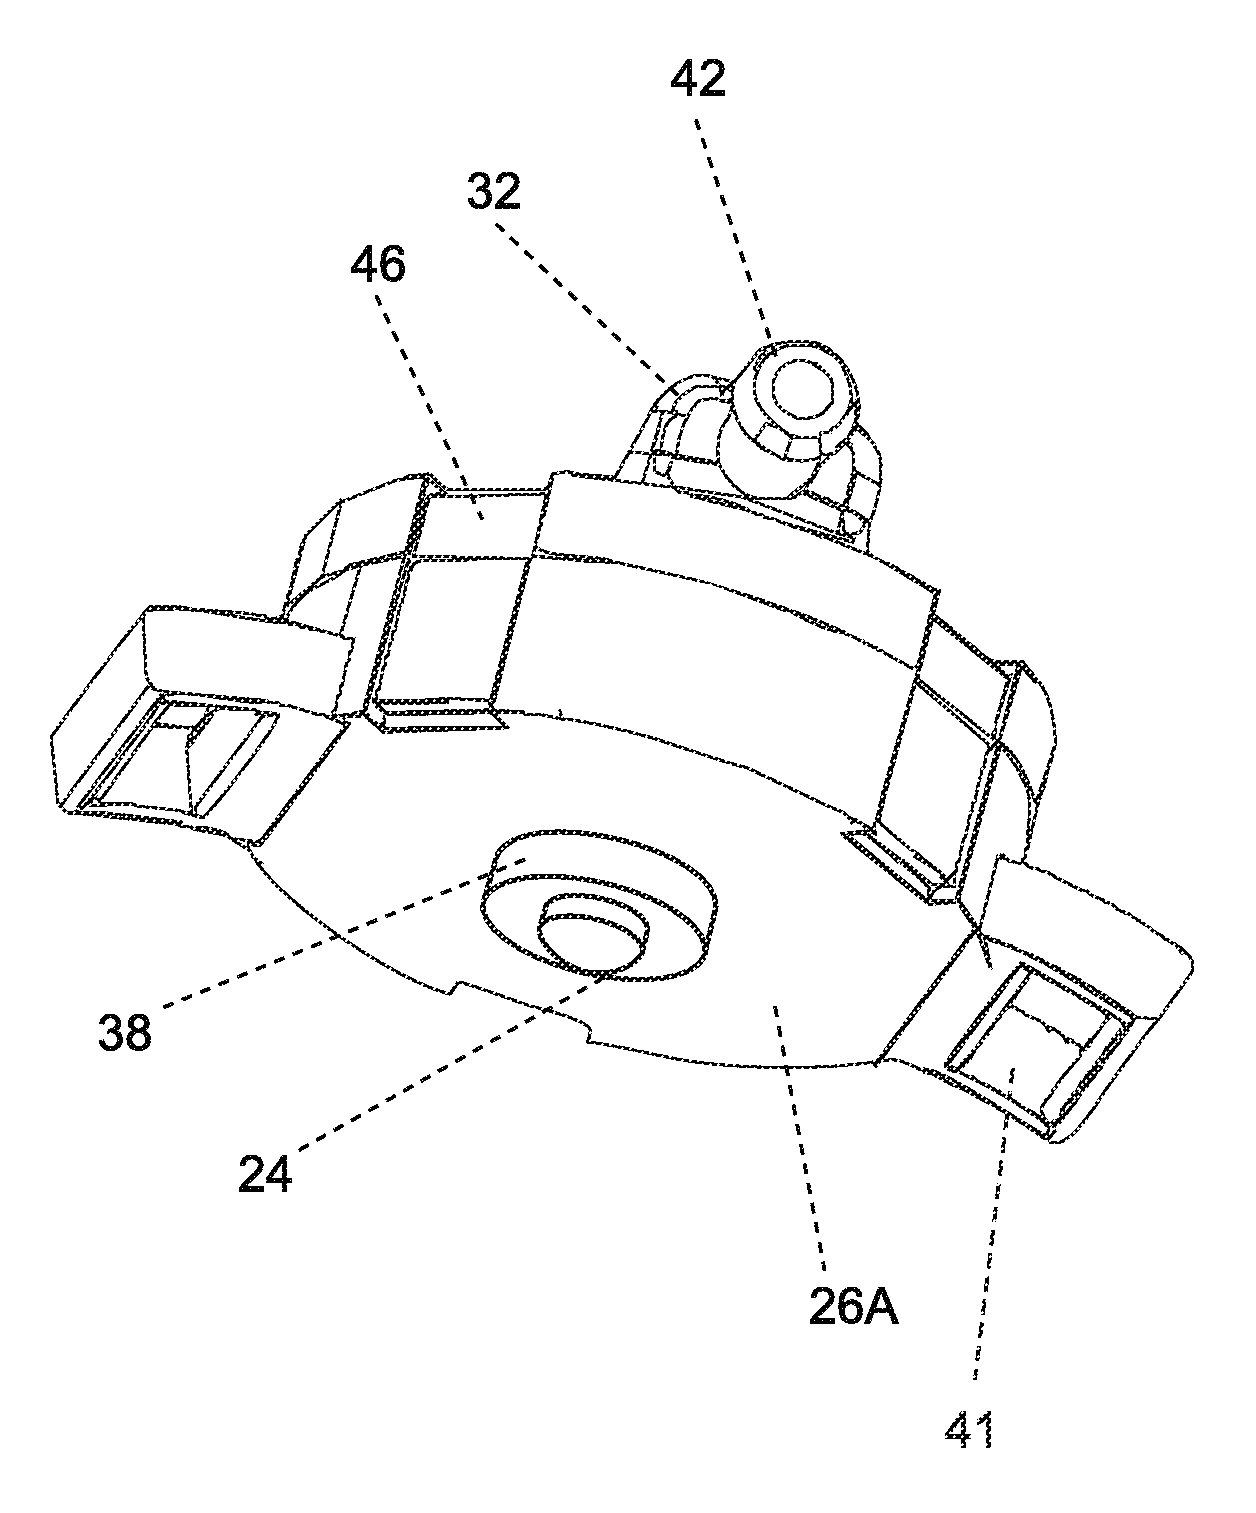 Device for providing tactile feedback for robotic apparatus using actuation